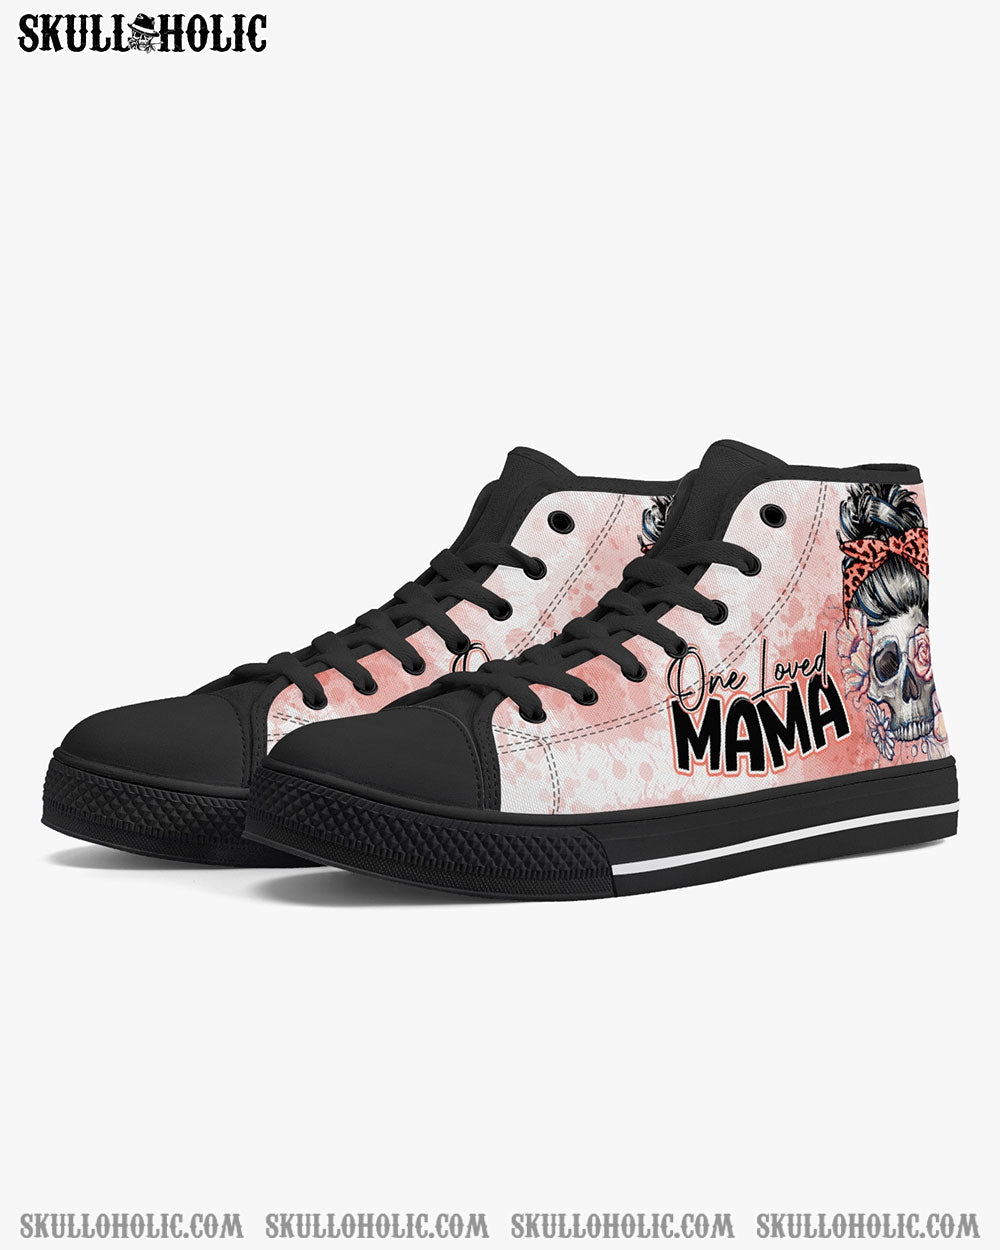 ONE LOVED MAMA FLOWER SKULL HIGH TOP CANVAS SHOES - TLNO1804222